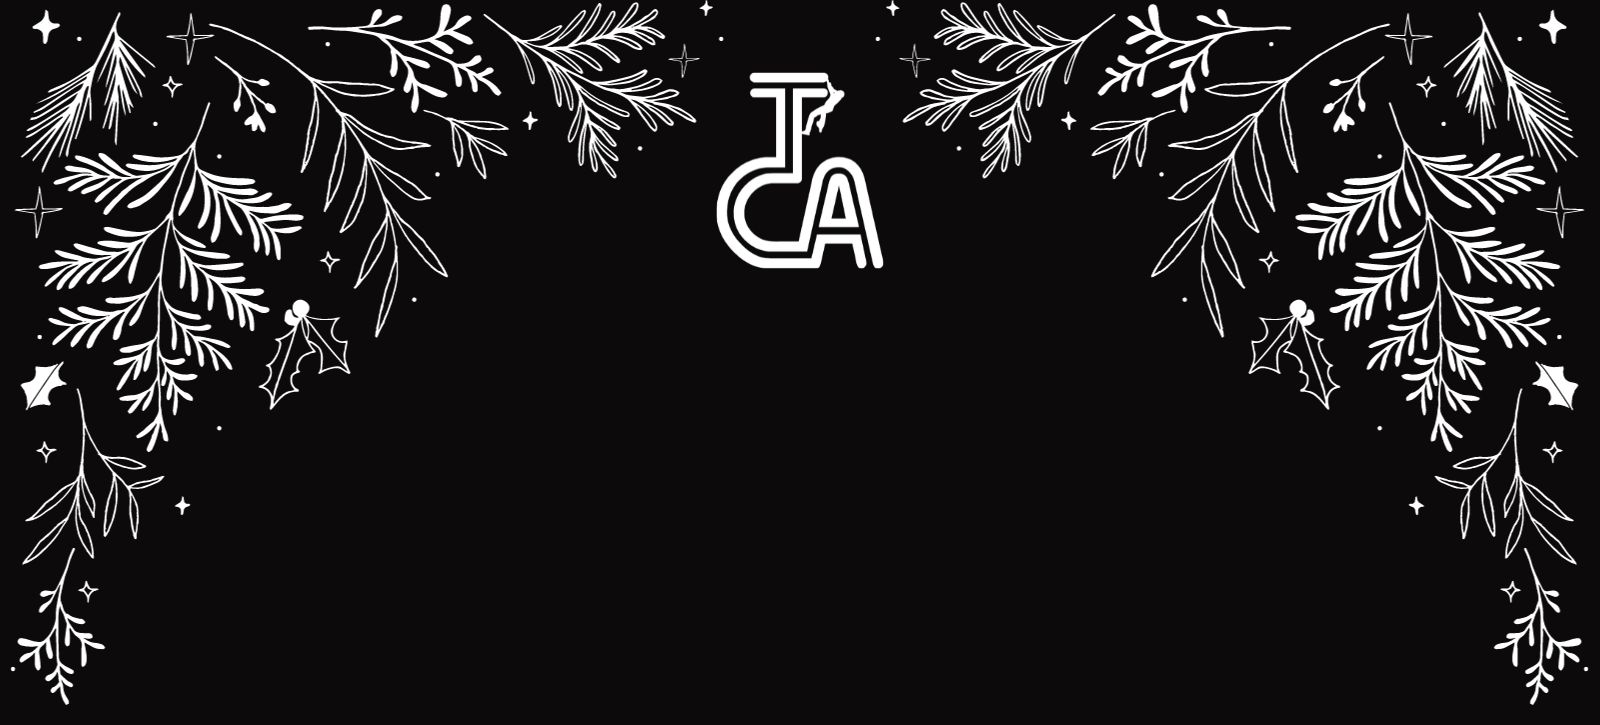 A black and white graphic header showing christmasy elements such as holly alongside a TCA logo